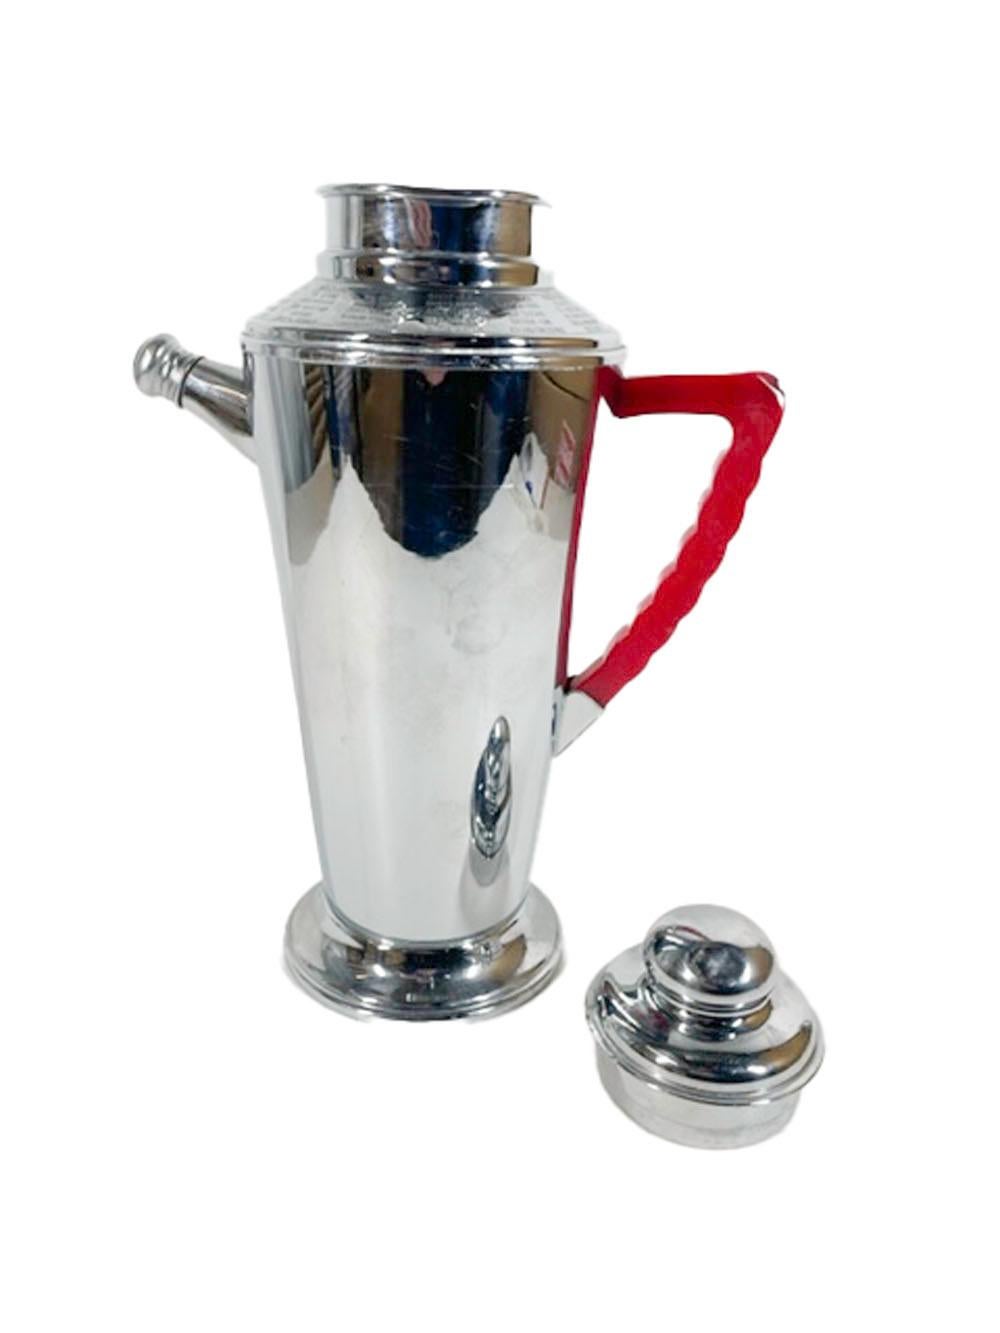 20th Century Art Deco Chrome Recipe Cocktail Shaker with Red Bakelite Handle Marked N.S. Co. For Sale